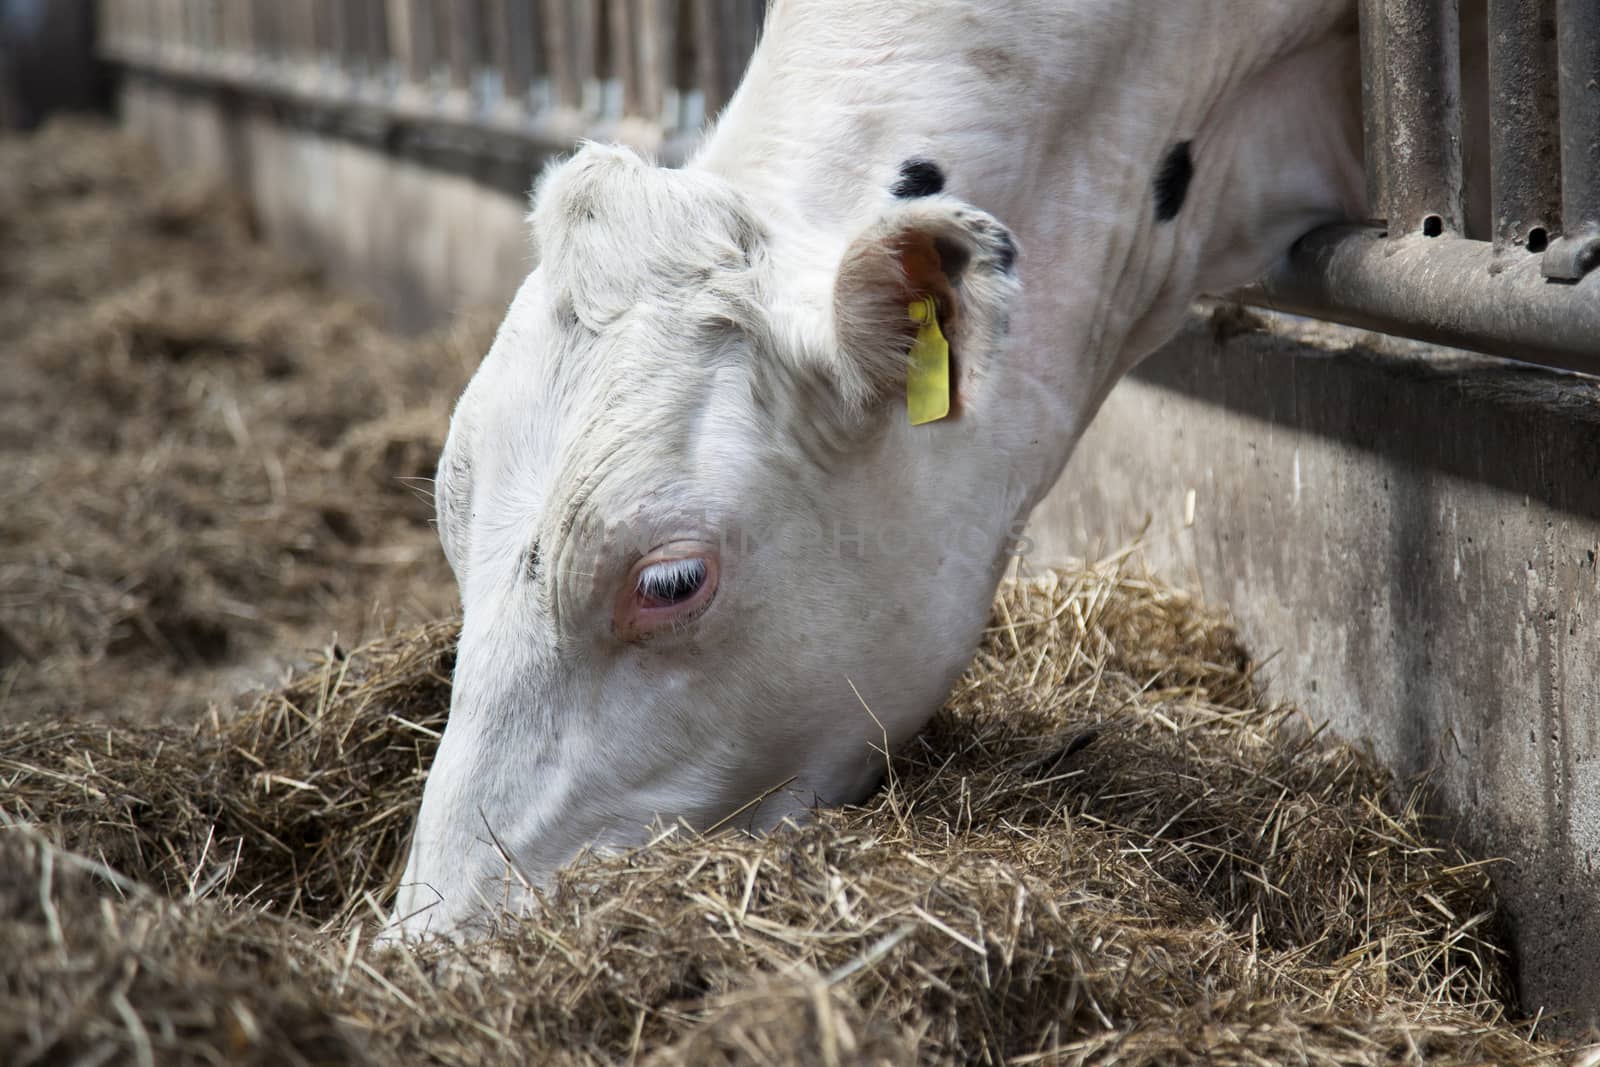 white headed cow eats hay in stable